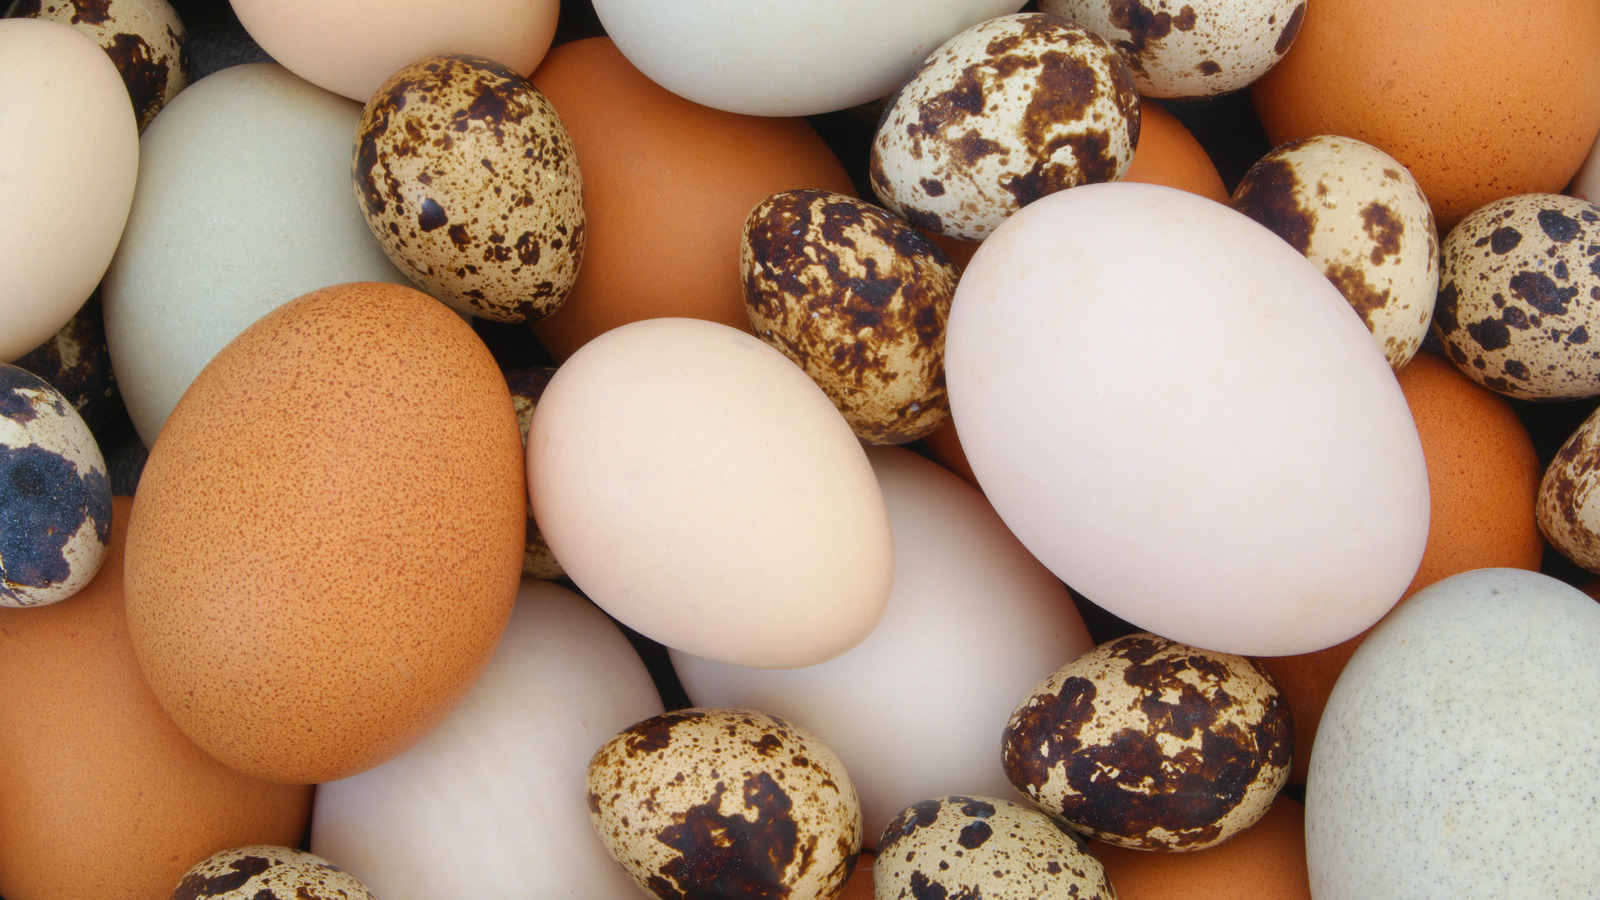 types of duck eggs